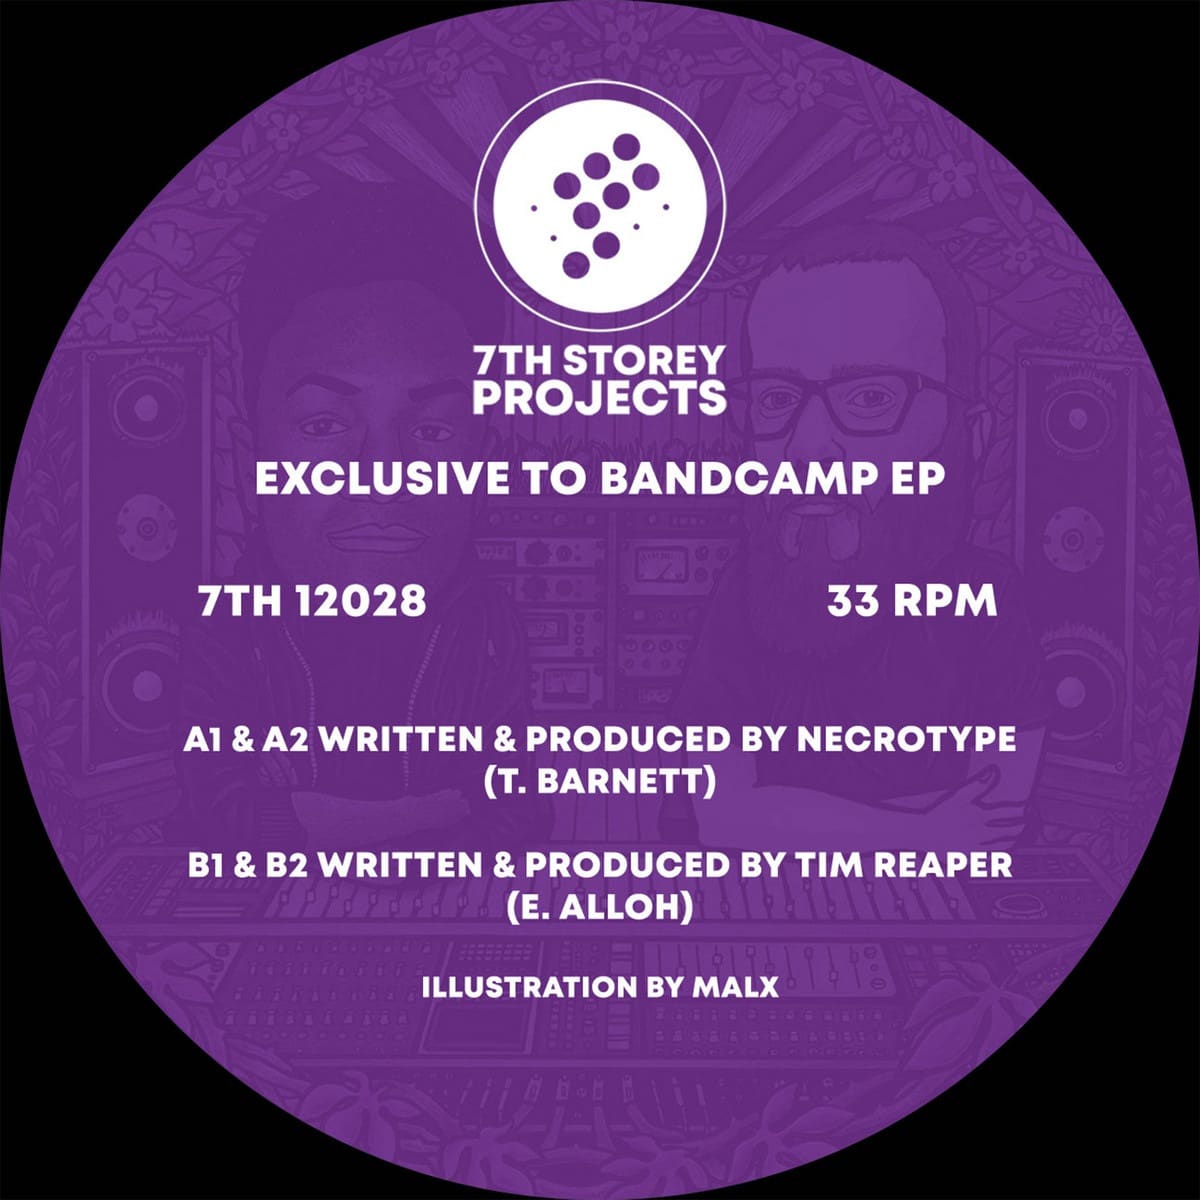 Necrotype/Tim Reaper - Exclusive to Bandcamp EP - 7TH12028 - 7th STORY PROJECTS